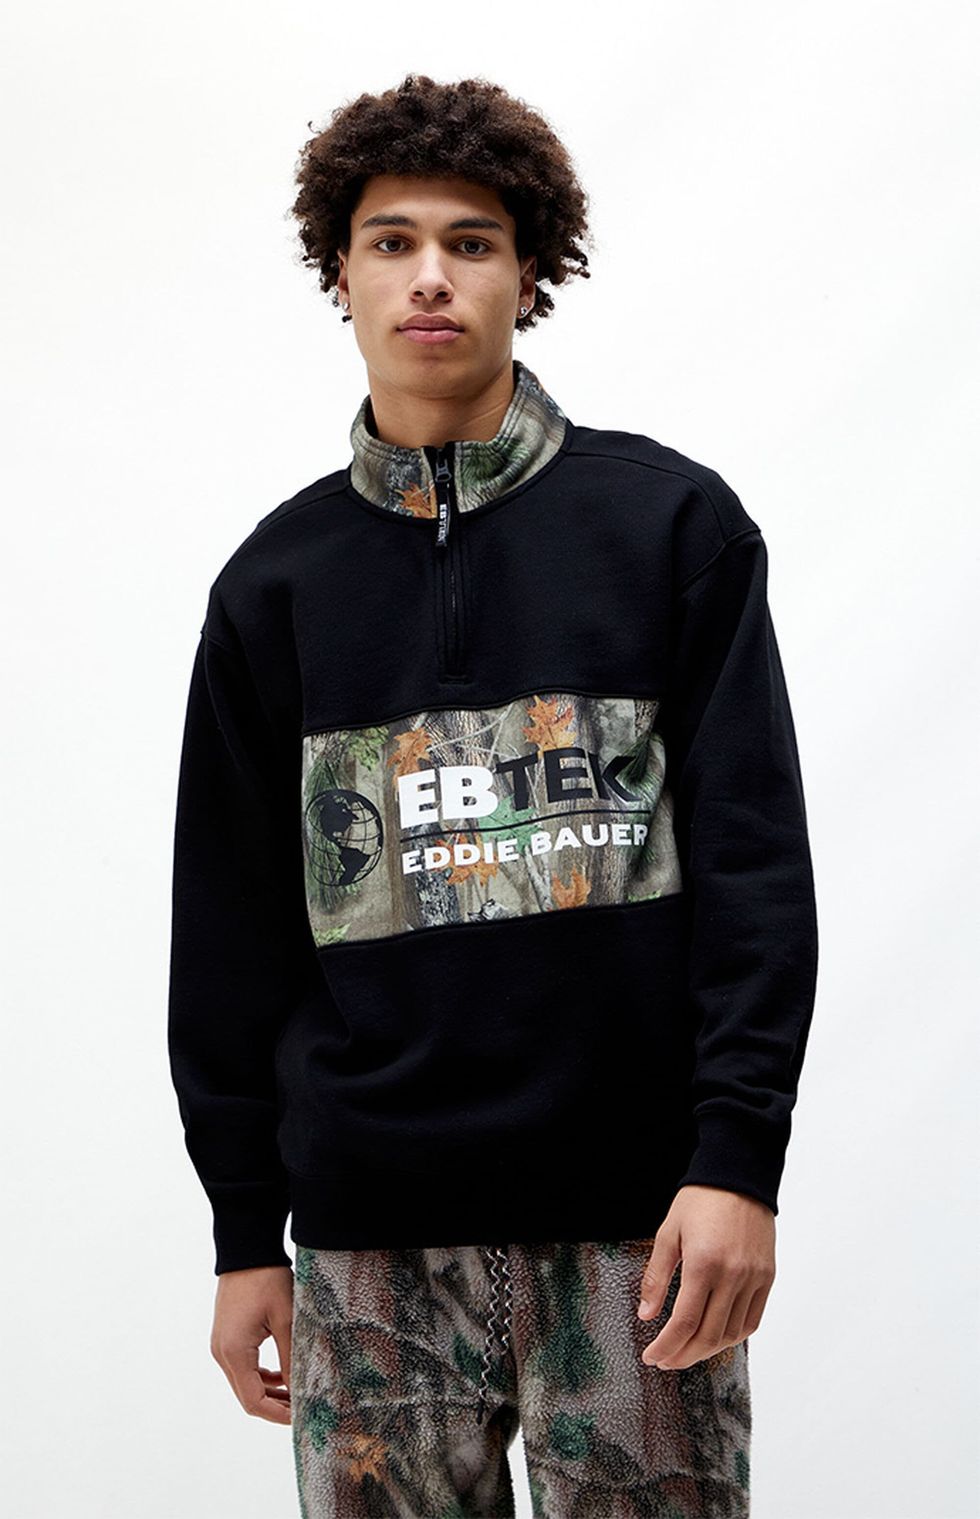 A$AP Rocky x Eddie Bauer Collection at PacSun: What's Still in Stock?